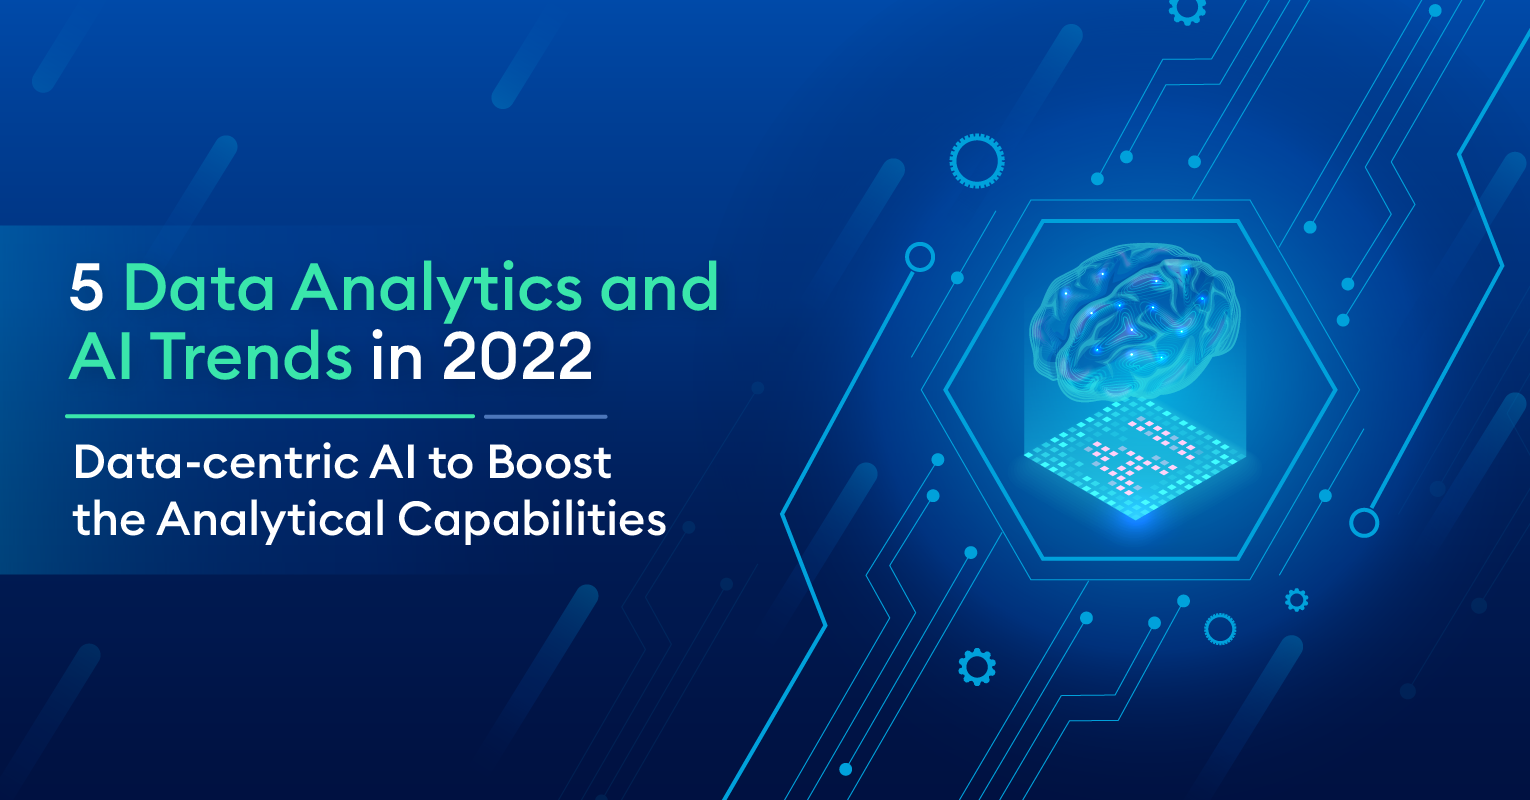 5 Data Analytics and AI Trends in 2022